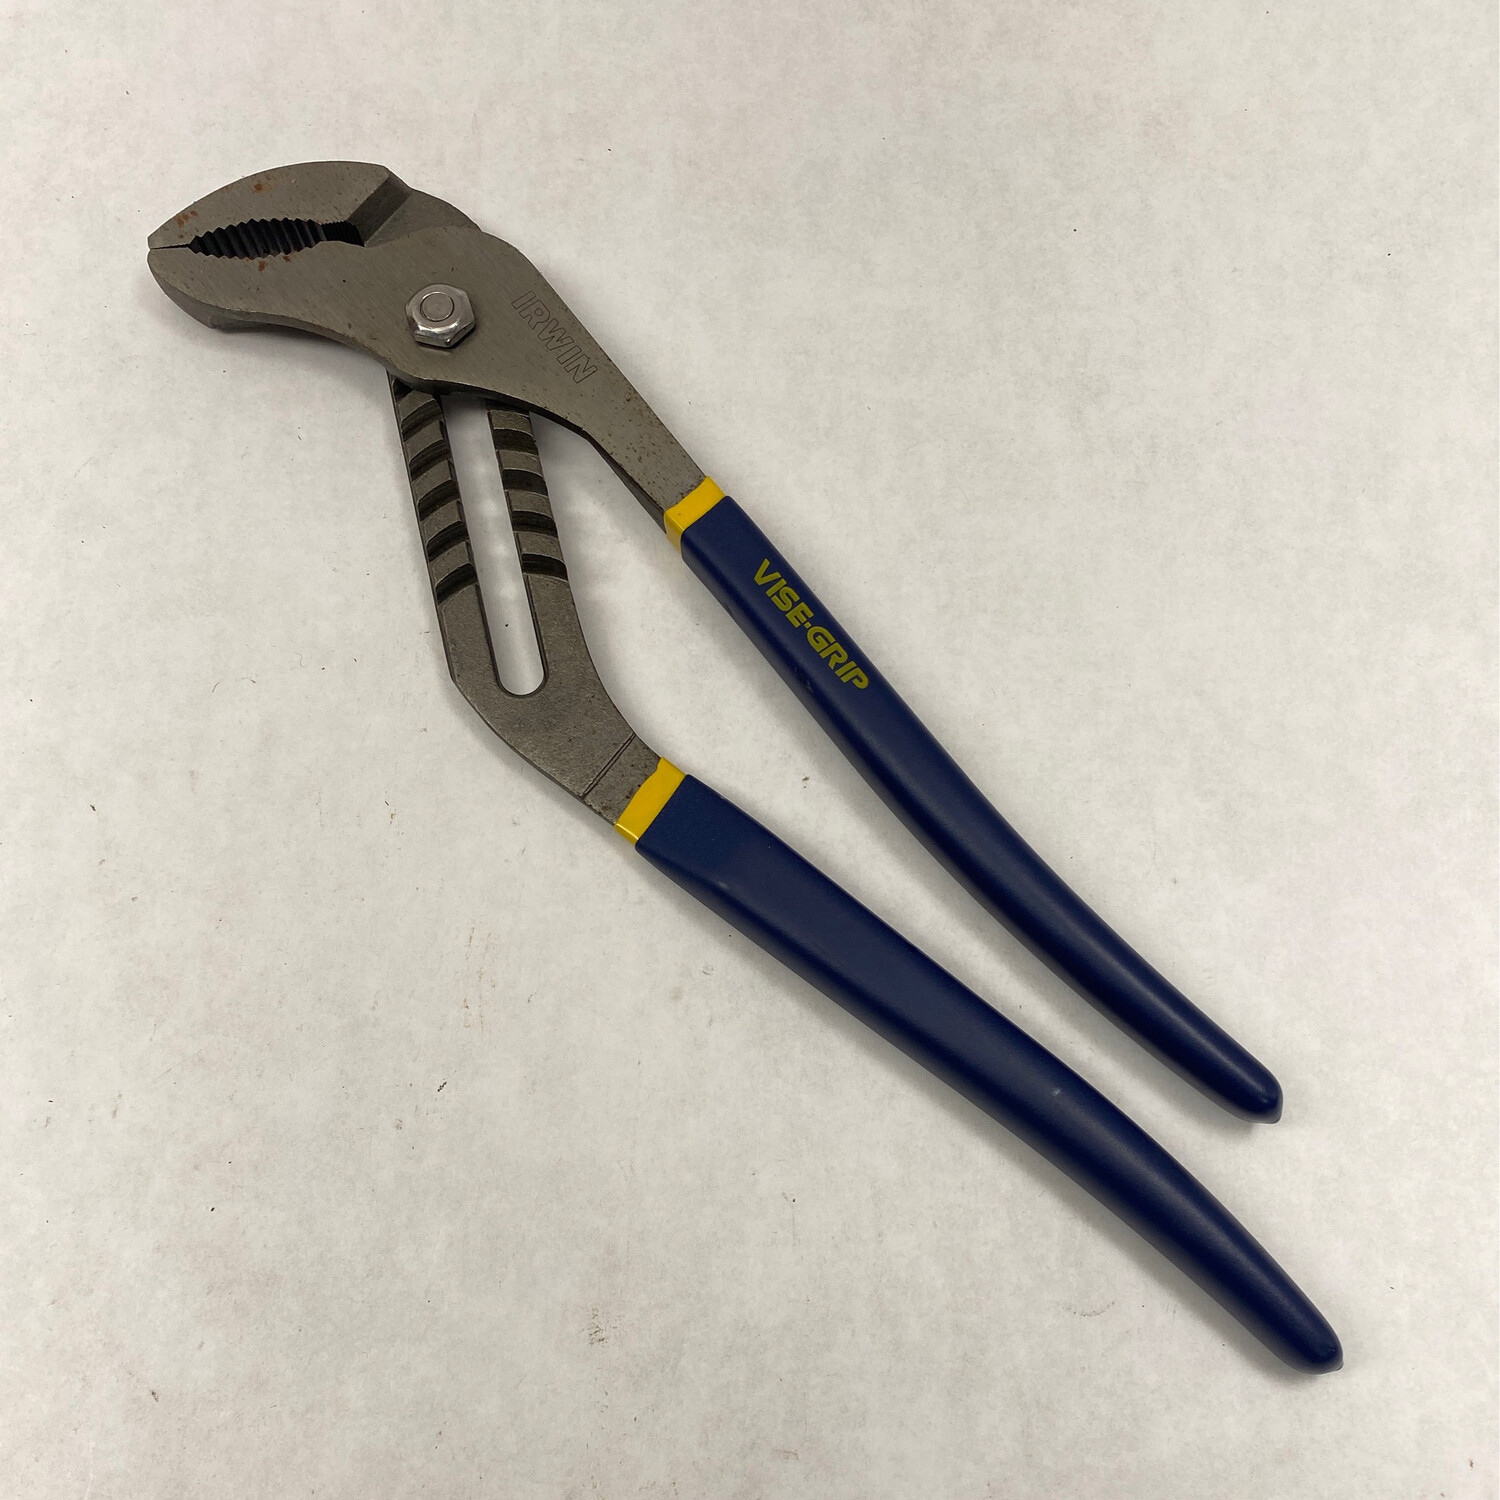 Irwin Vise Grip 16” Groove Joint Pliers,